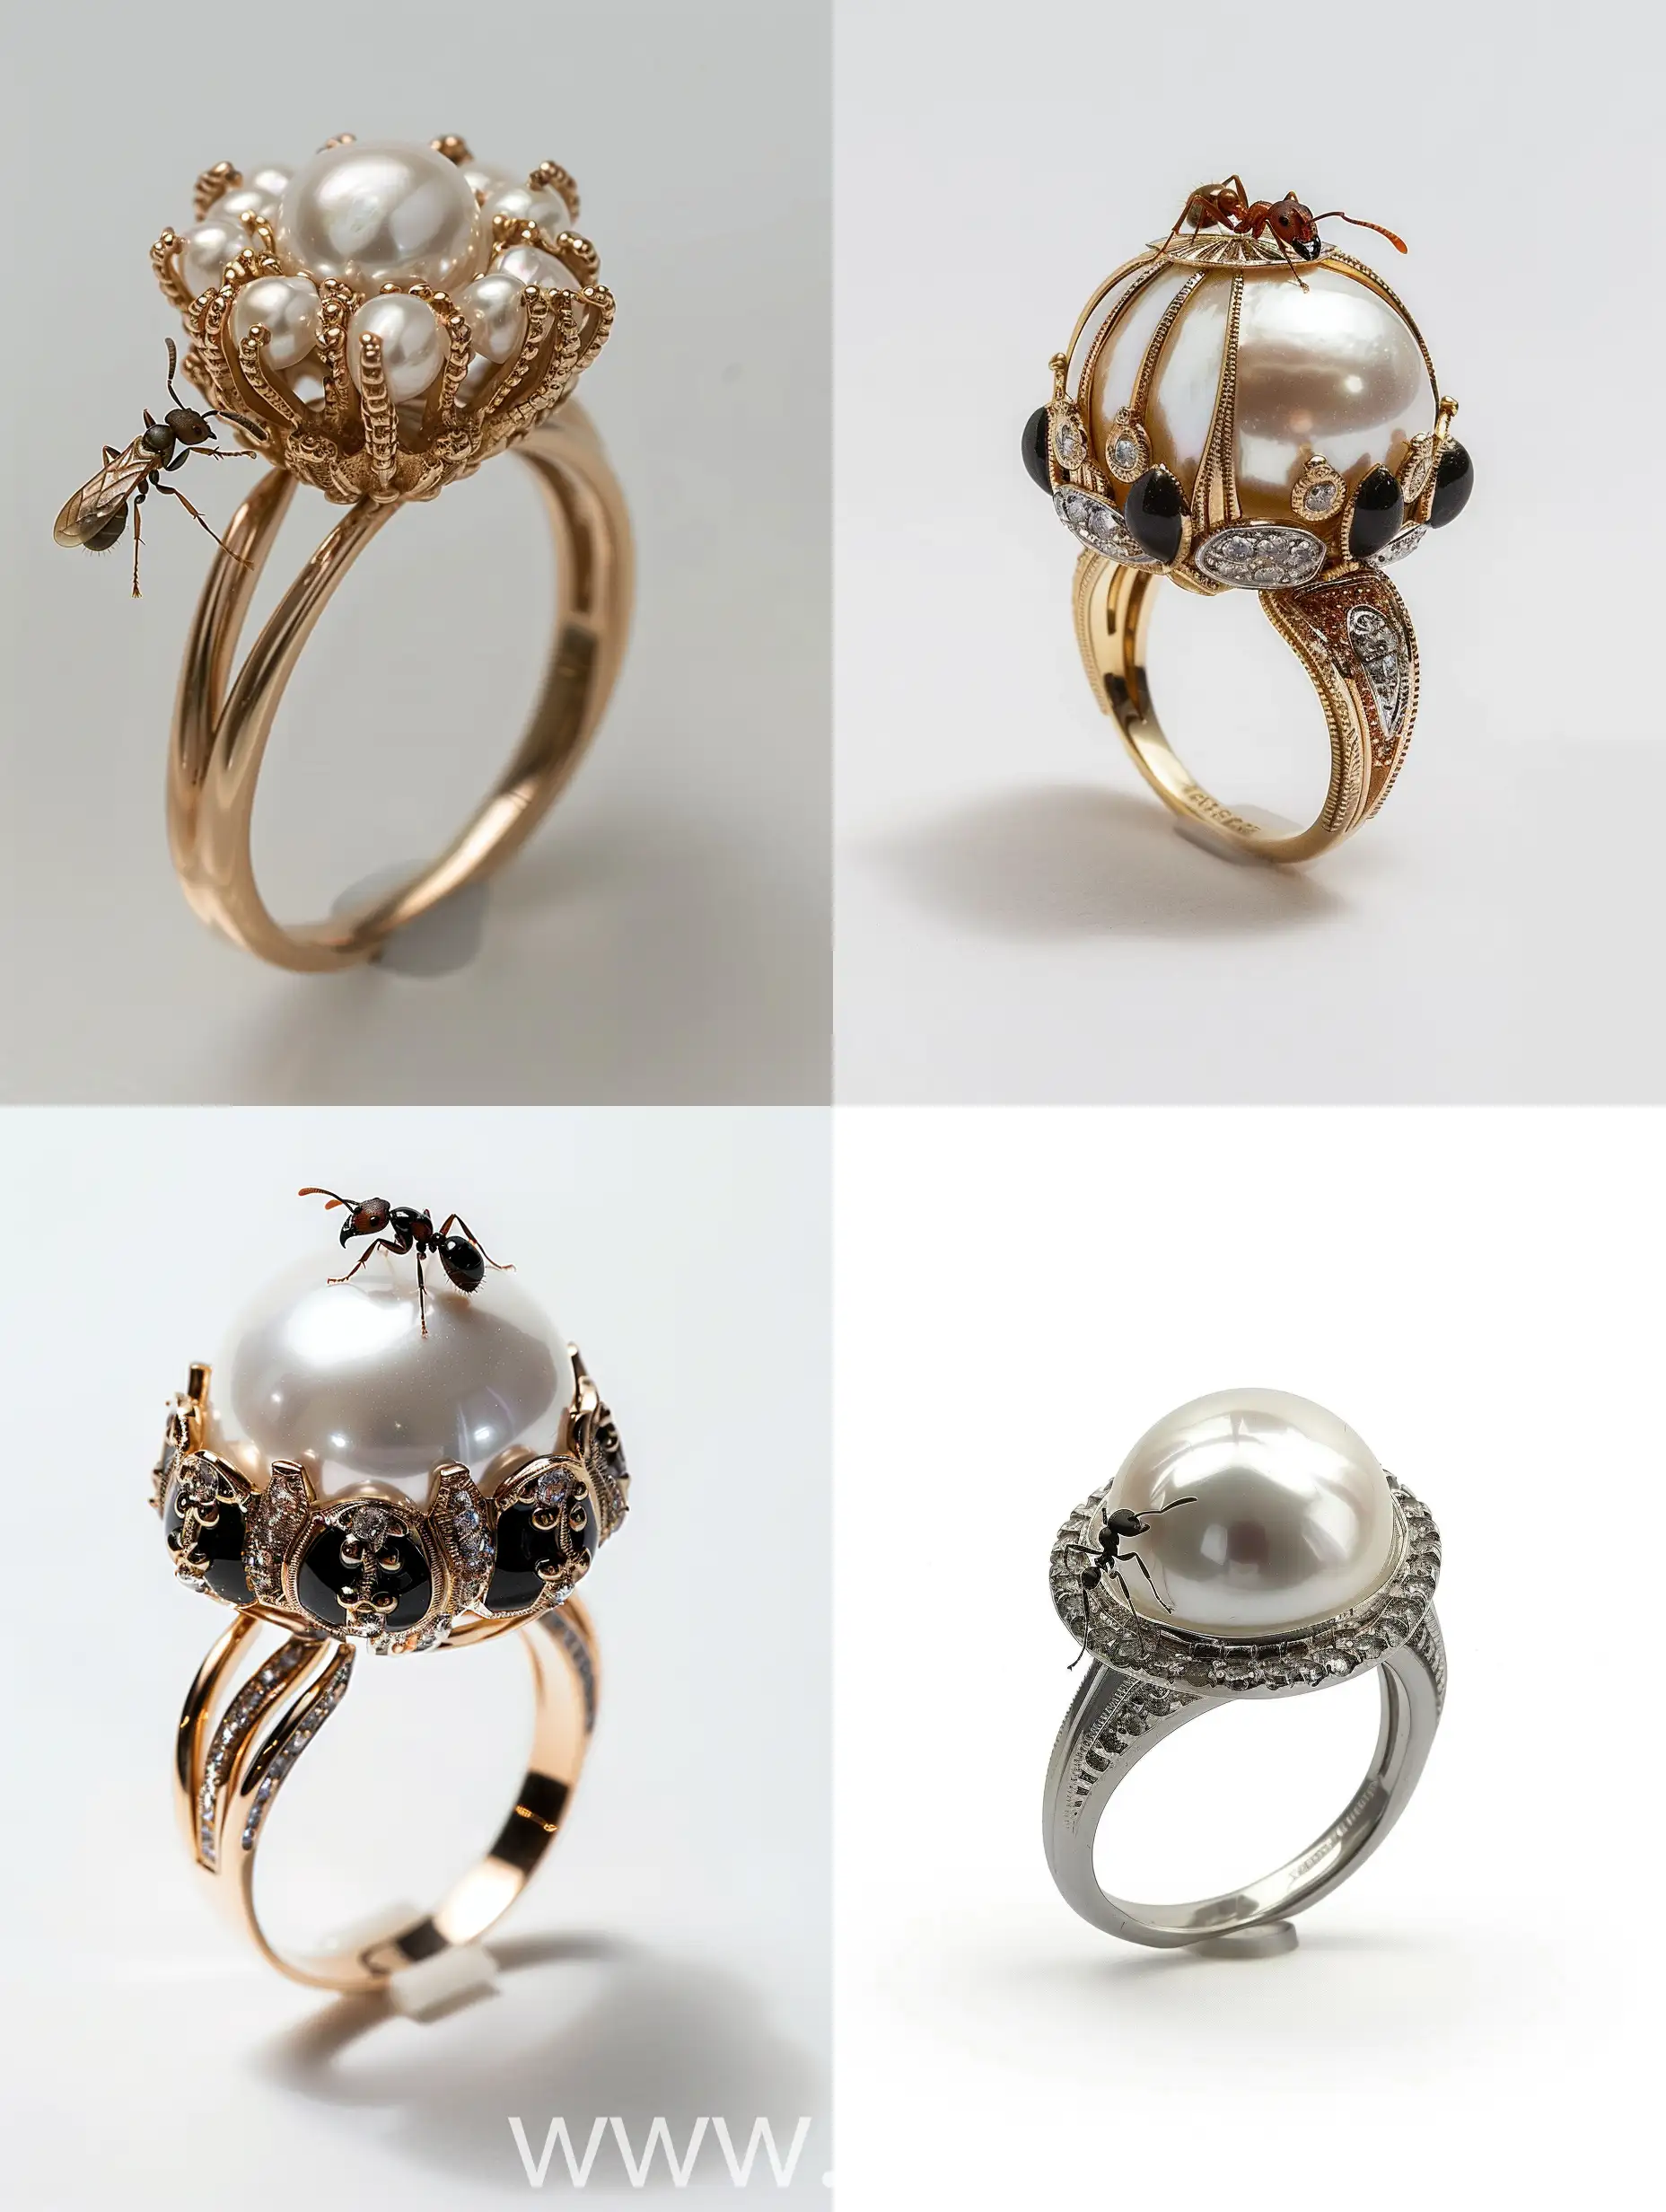 Exquisite-Gold-and-Platinum-Ring-with-Ant-on-Pearl-and-Precious-Stones